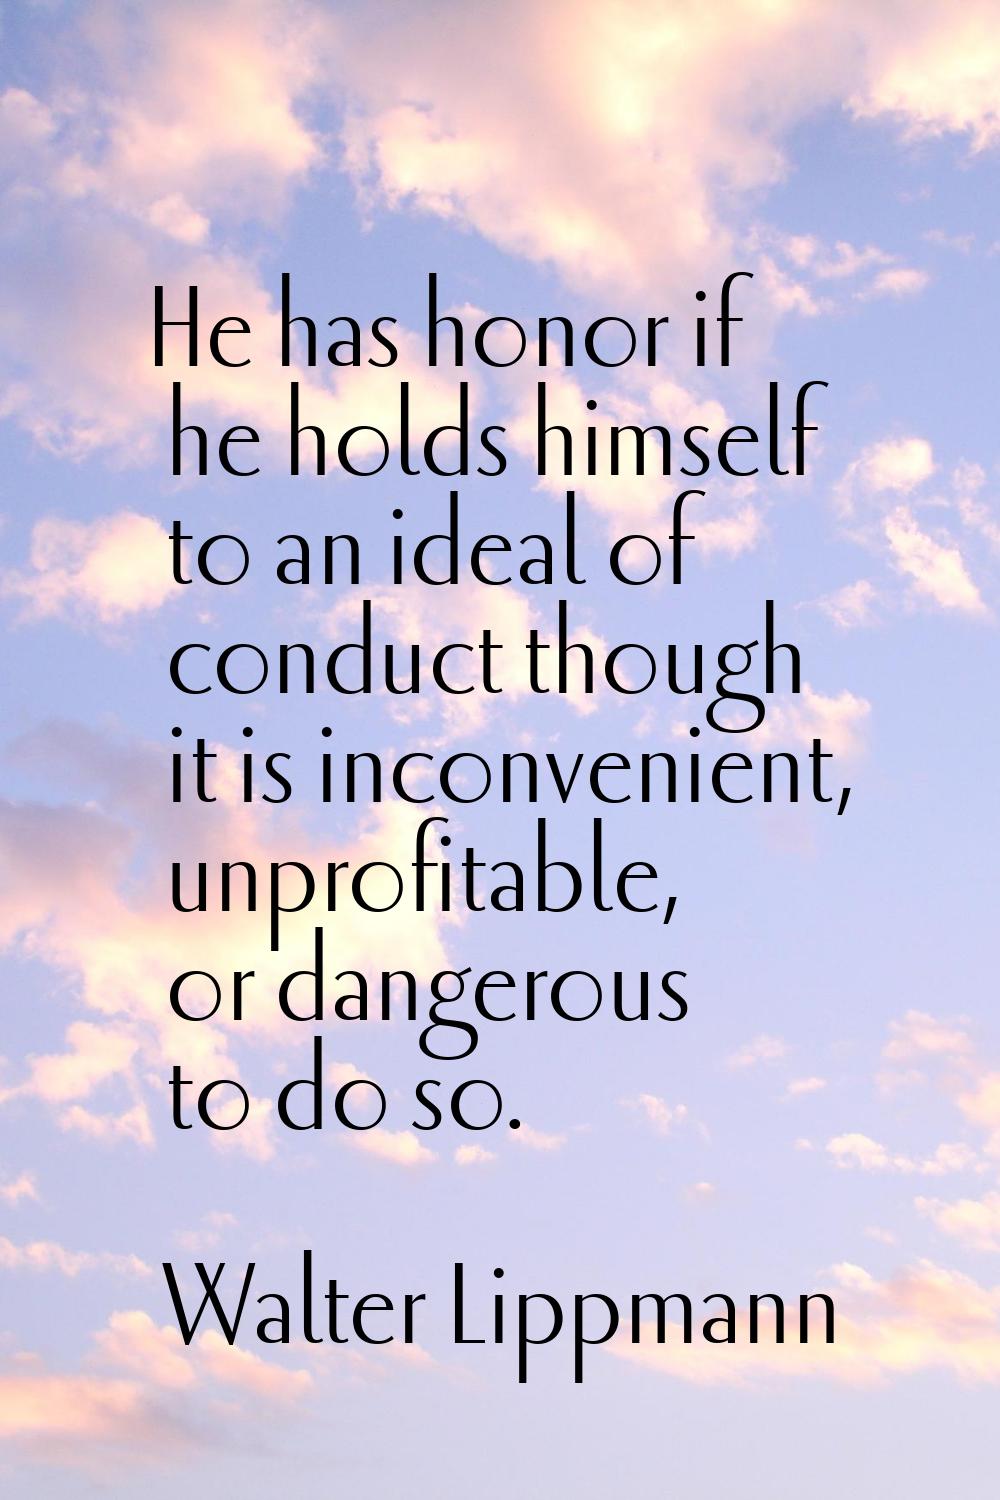 He has honor if he holds himself to an ideal of conduct though it is inconvenient, unprofitable, or